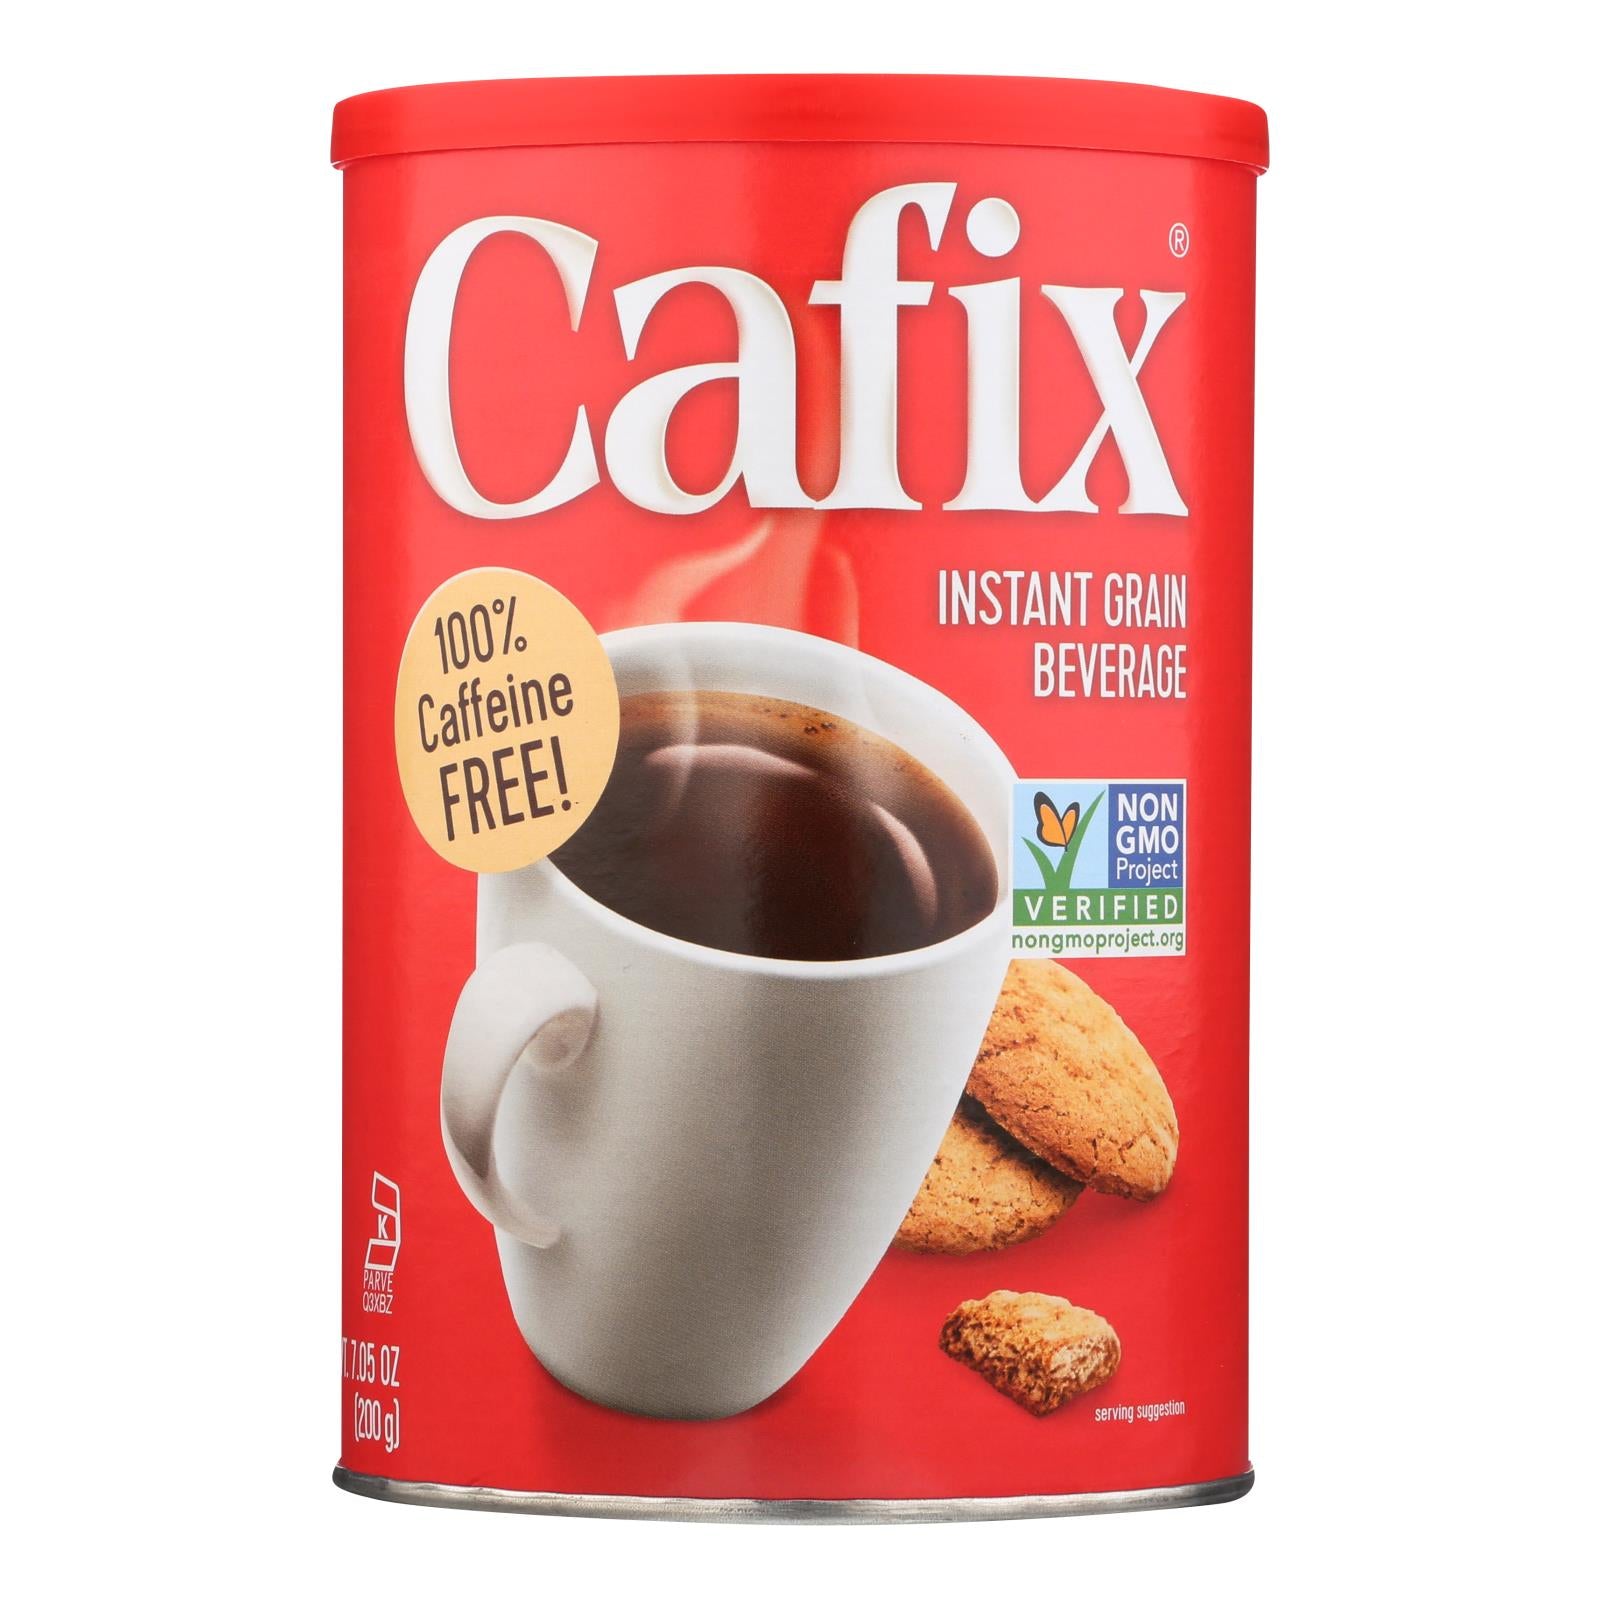 Cafix All Natural Instant Beverage Coffee Substitute - Caffeine Free - Case Of 6 - 7.05 Oz.